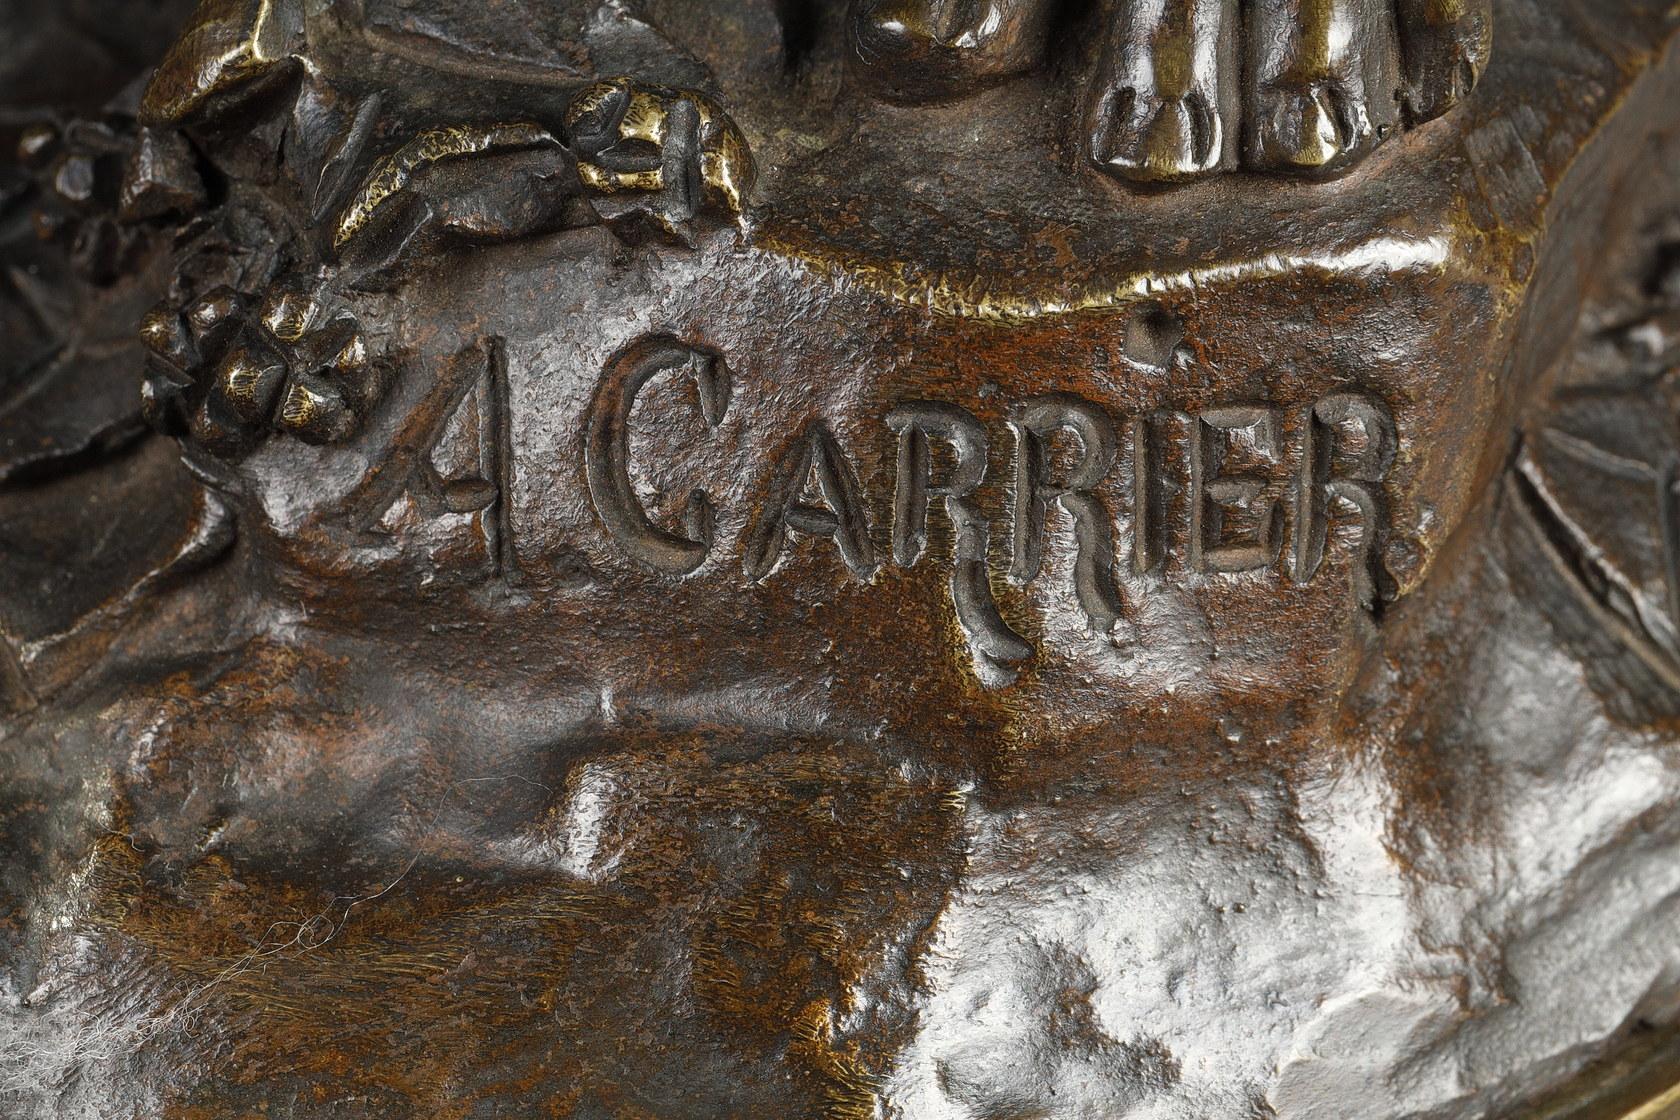 Bronze sculpture with a nuanced dark brown patina
signed on the base 